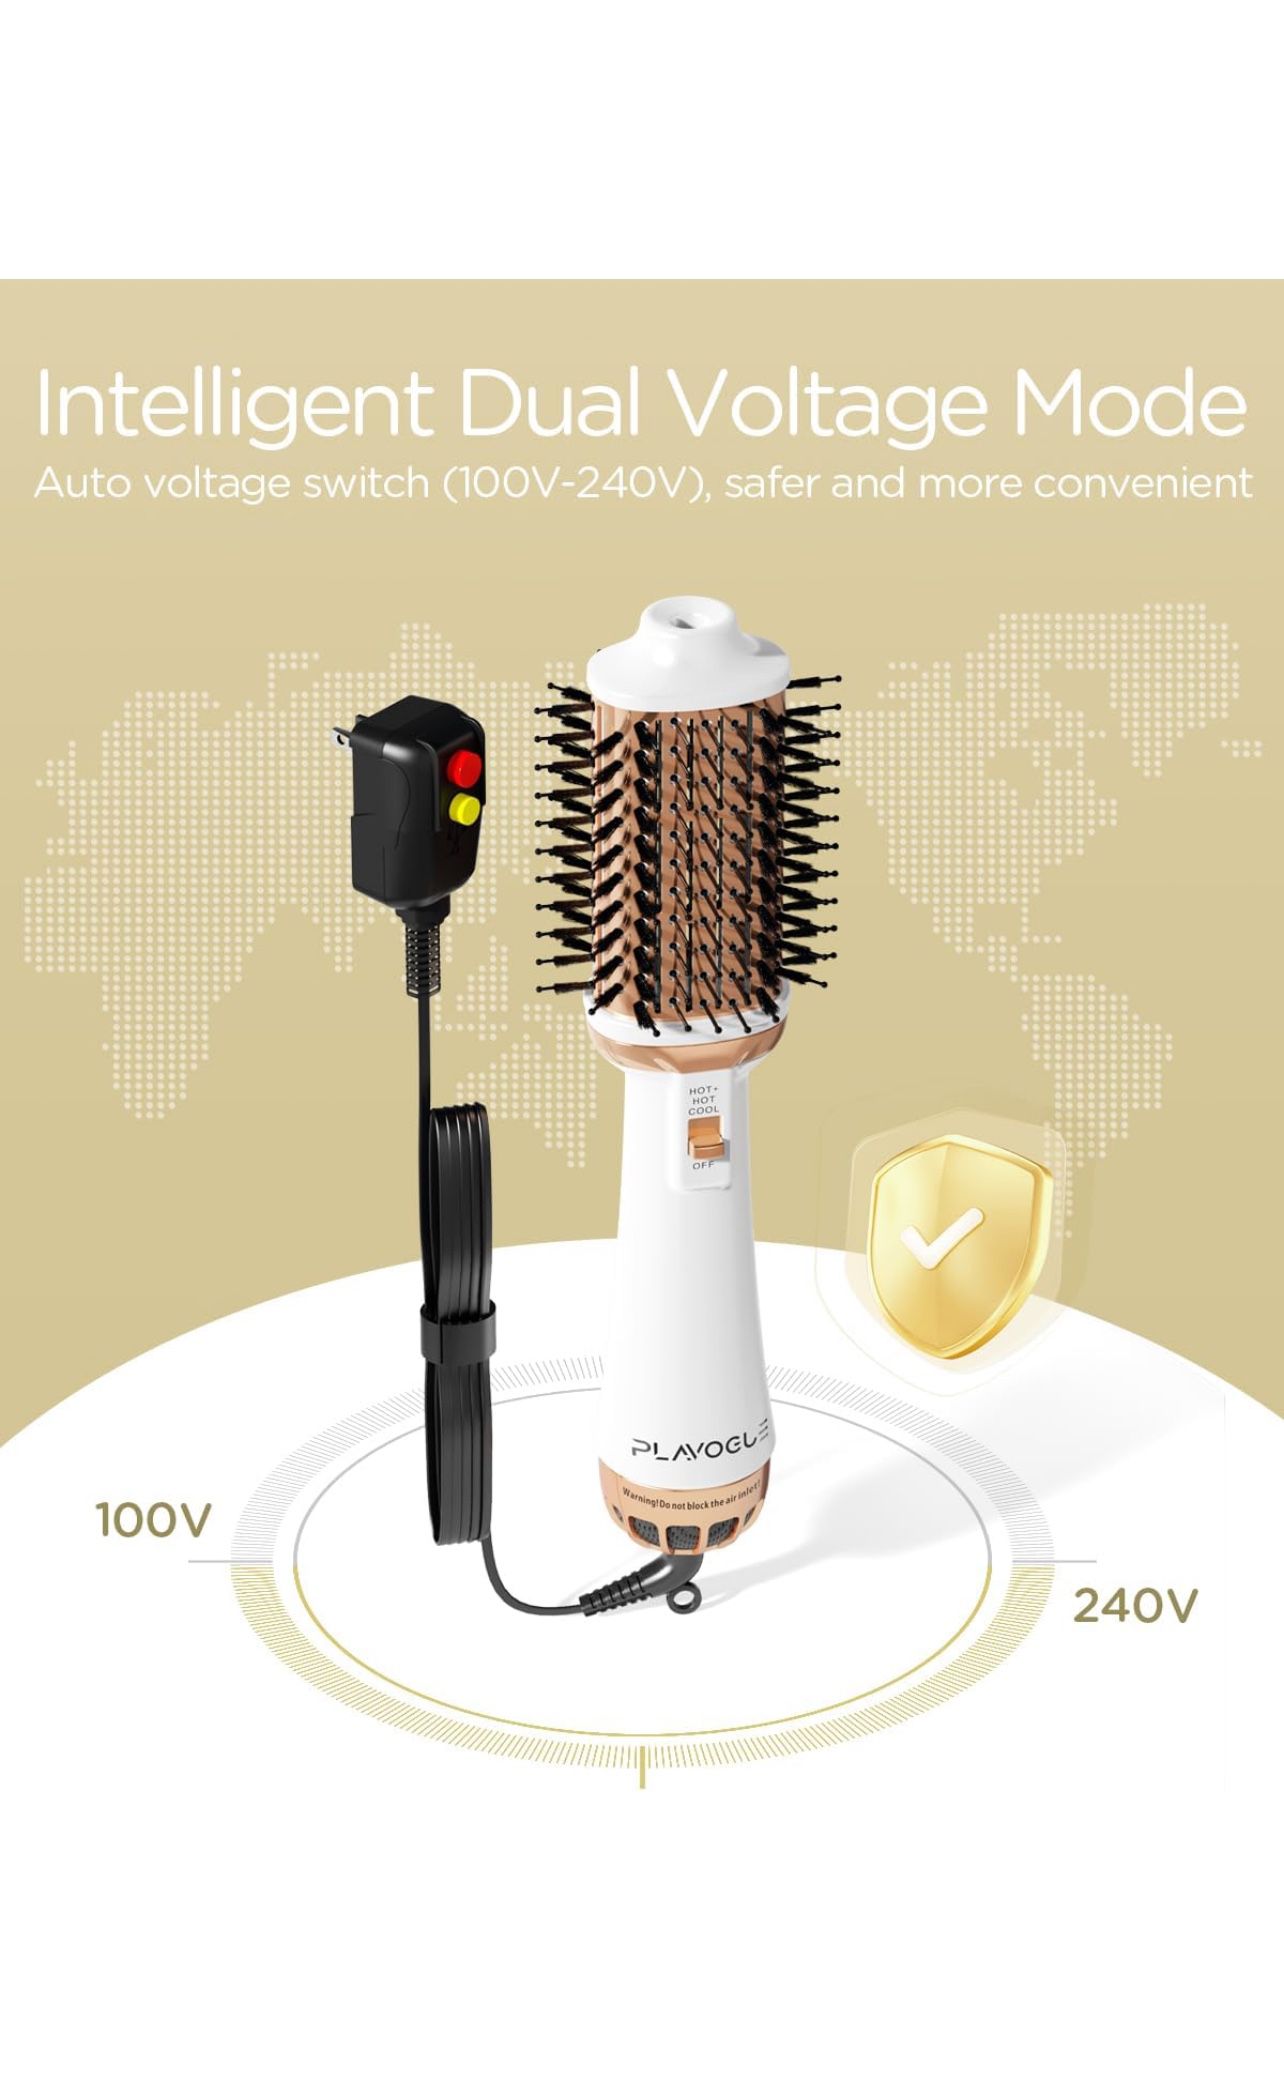 Dual Voltage Hair Dryer Brush, Plavogue 100 Millions Negative Ionic Blow Dryer Brush Volumizer, One-Step Hot Air Brush in One for European Travel, Sty